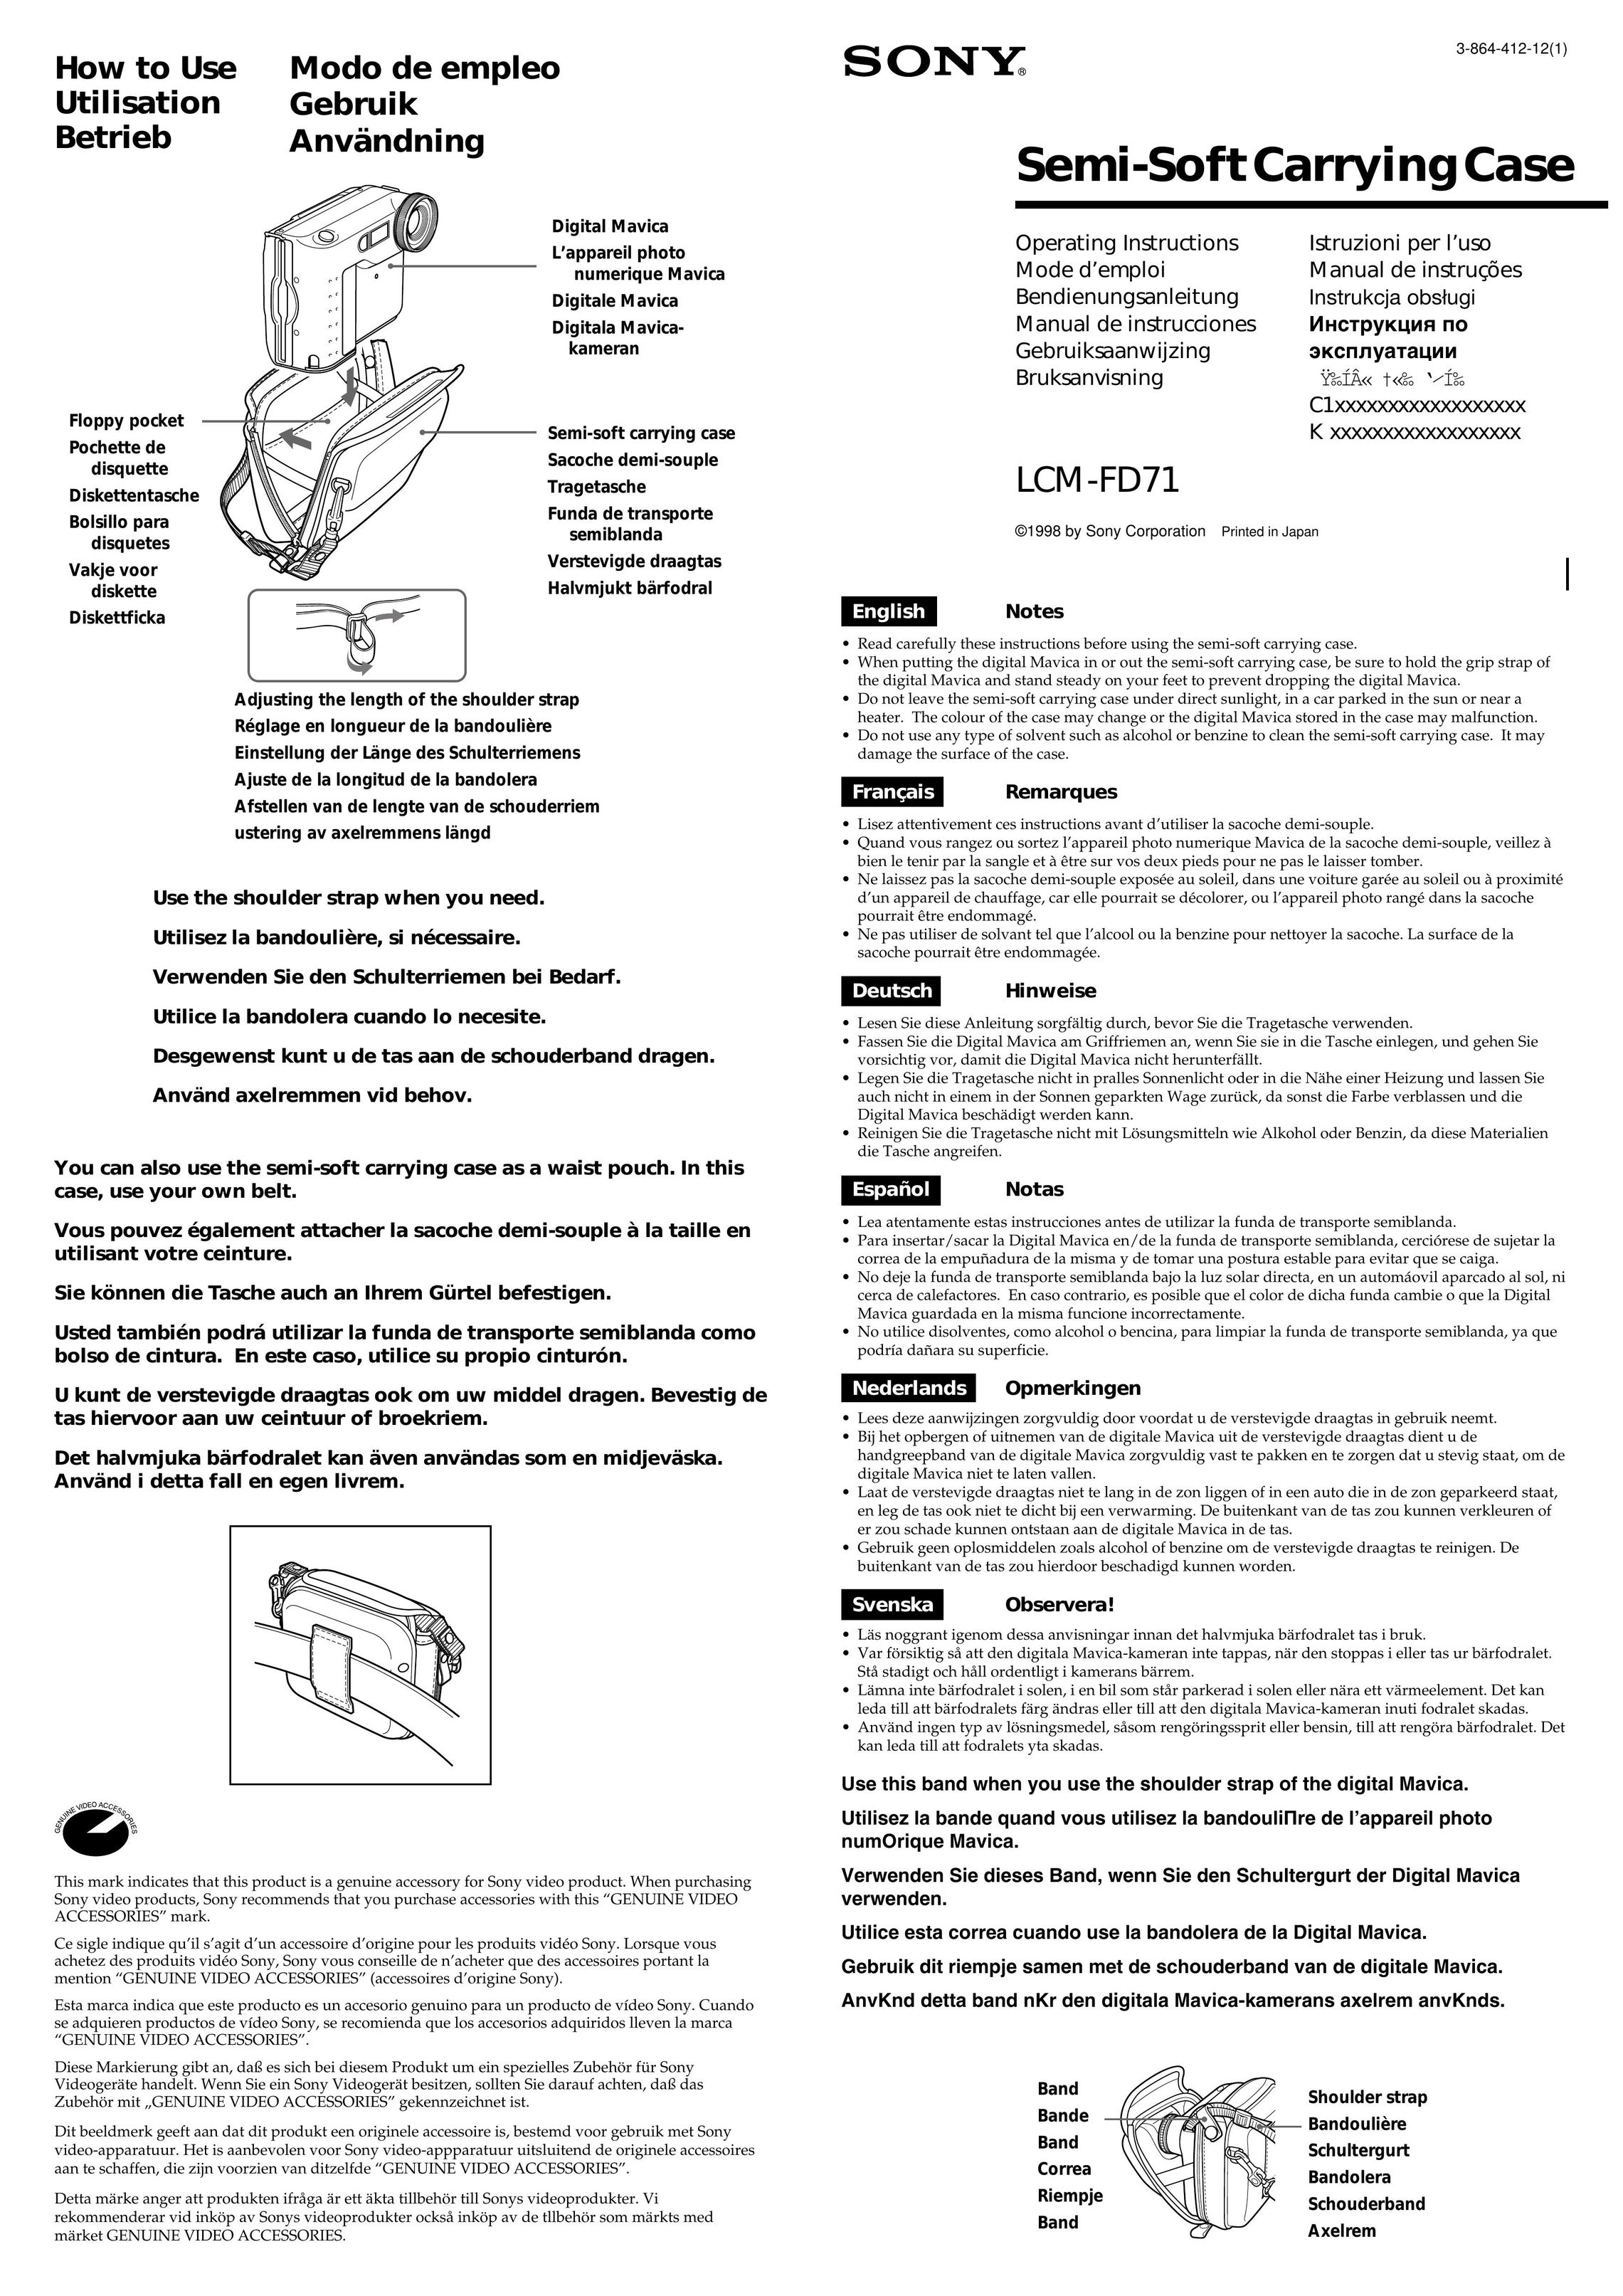 Sony LCM-FD71 Carrying Case User Manual